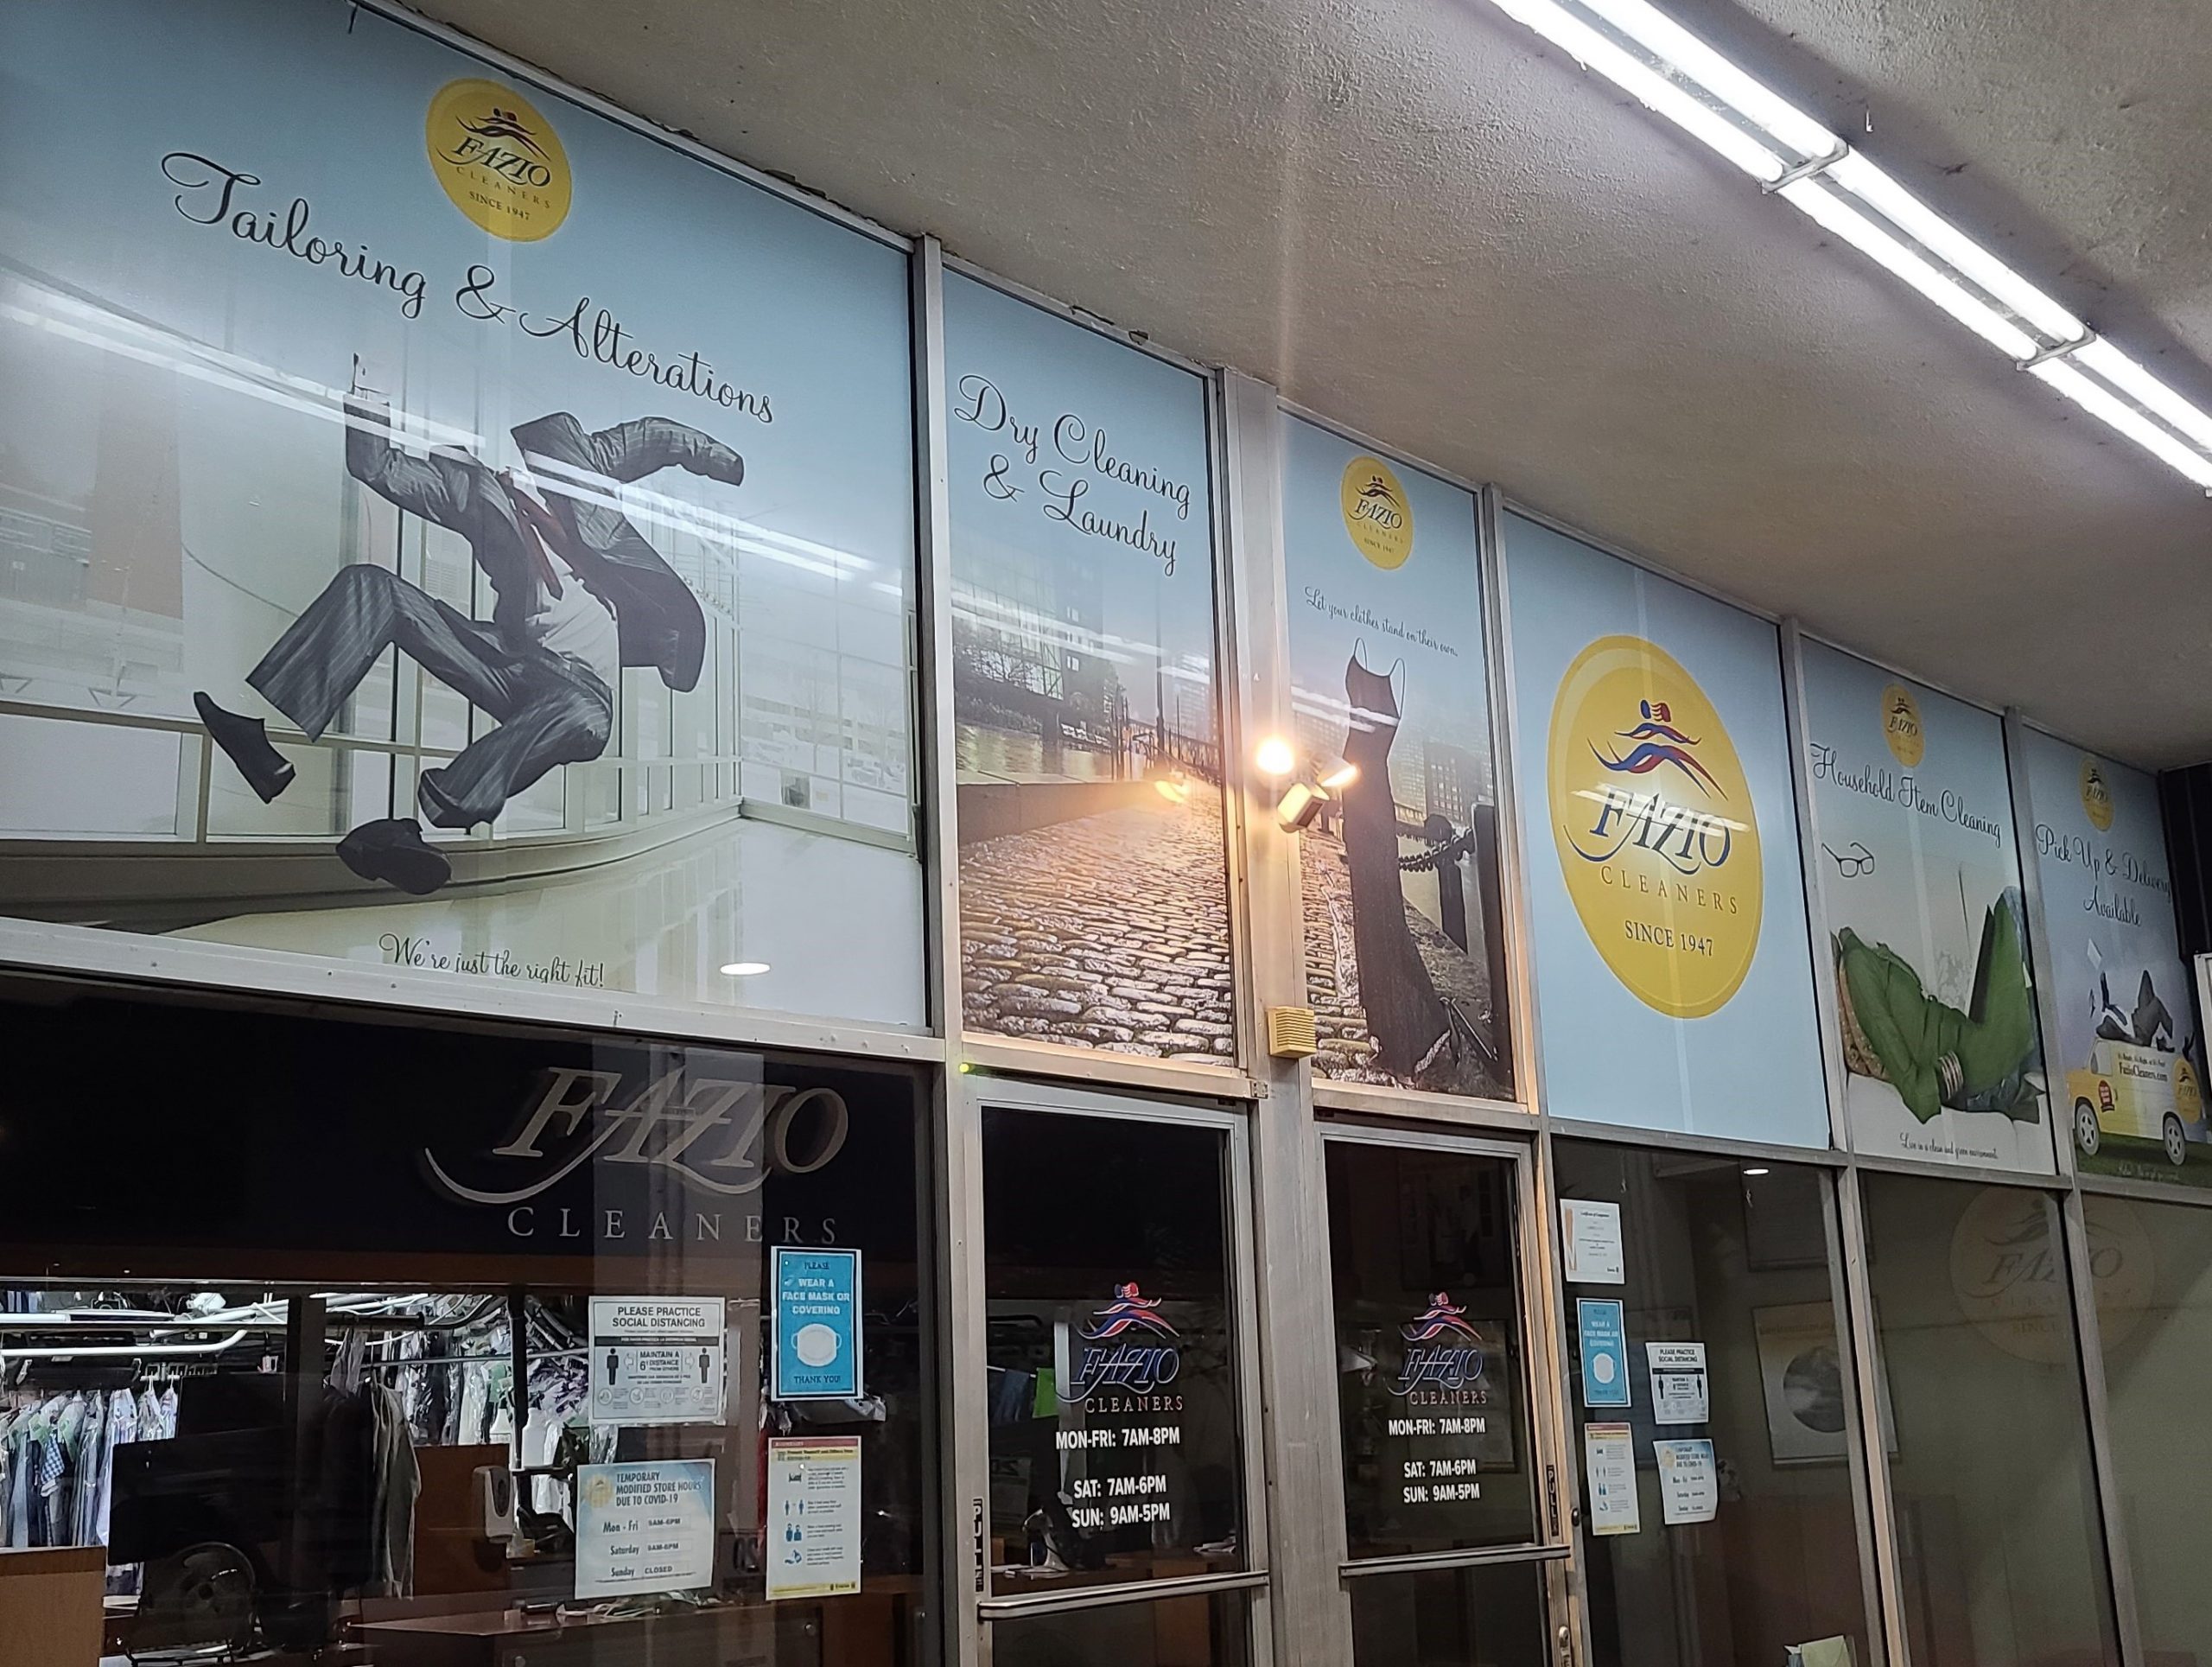 You are currently viewing Perforated Window Graphics for Fazio Cleaners in Los Angeles